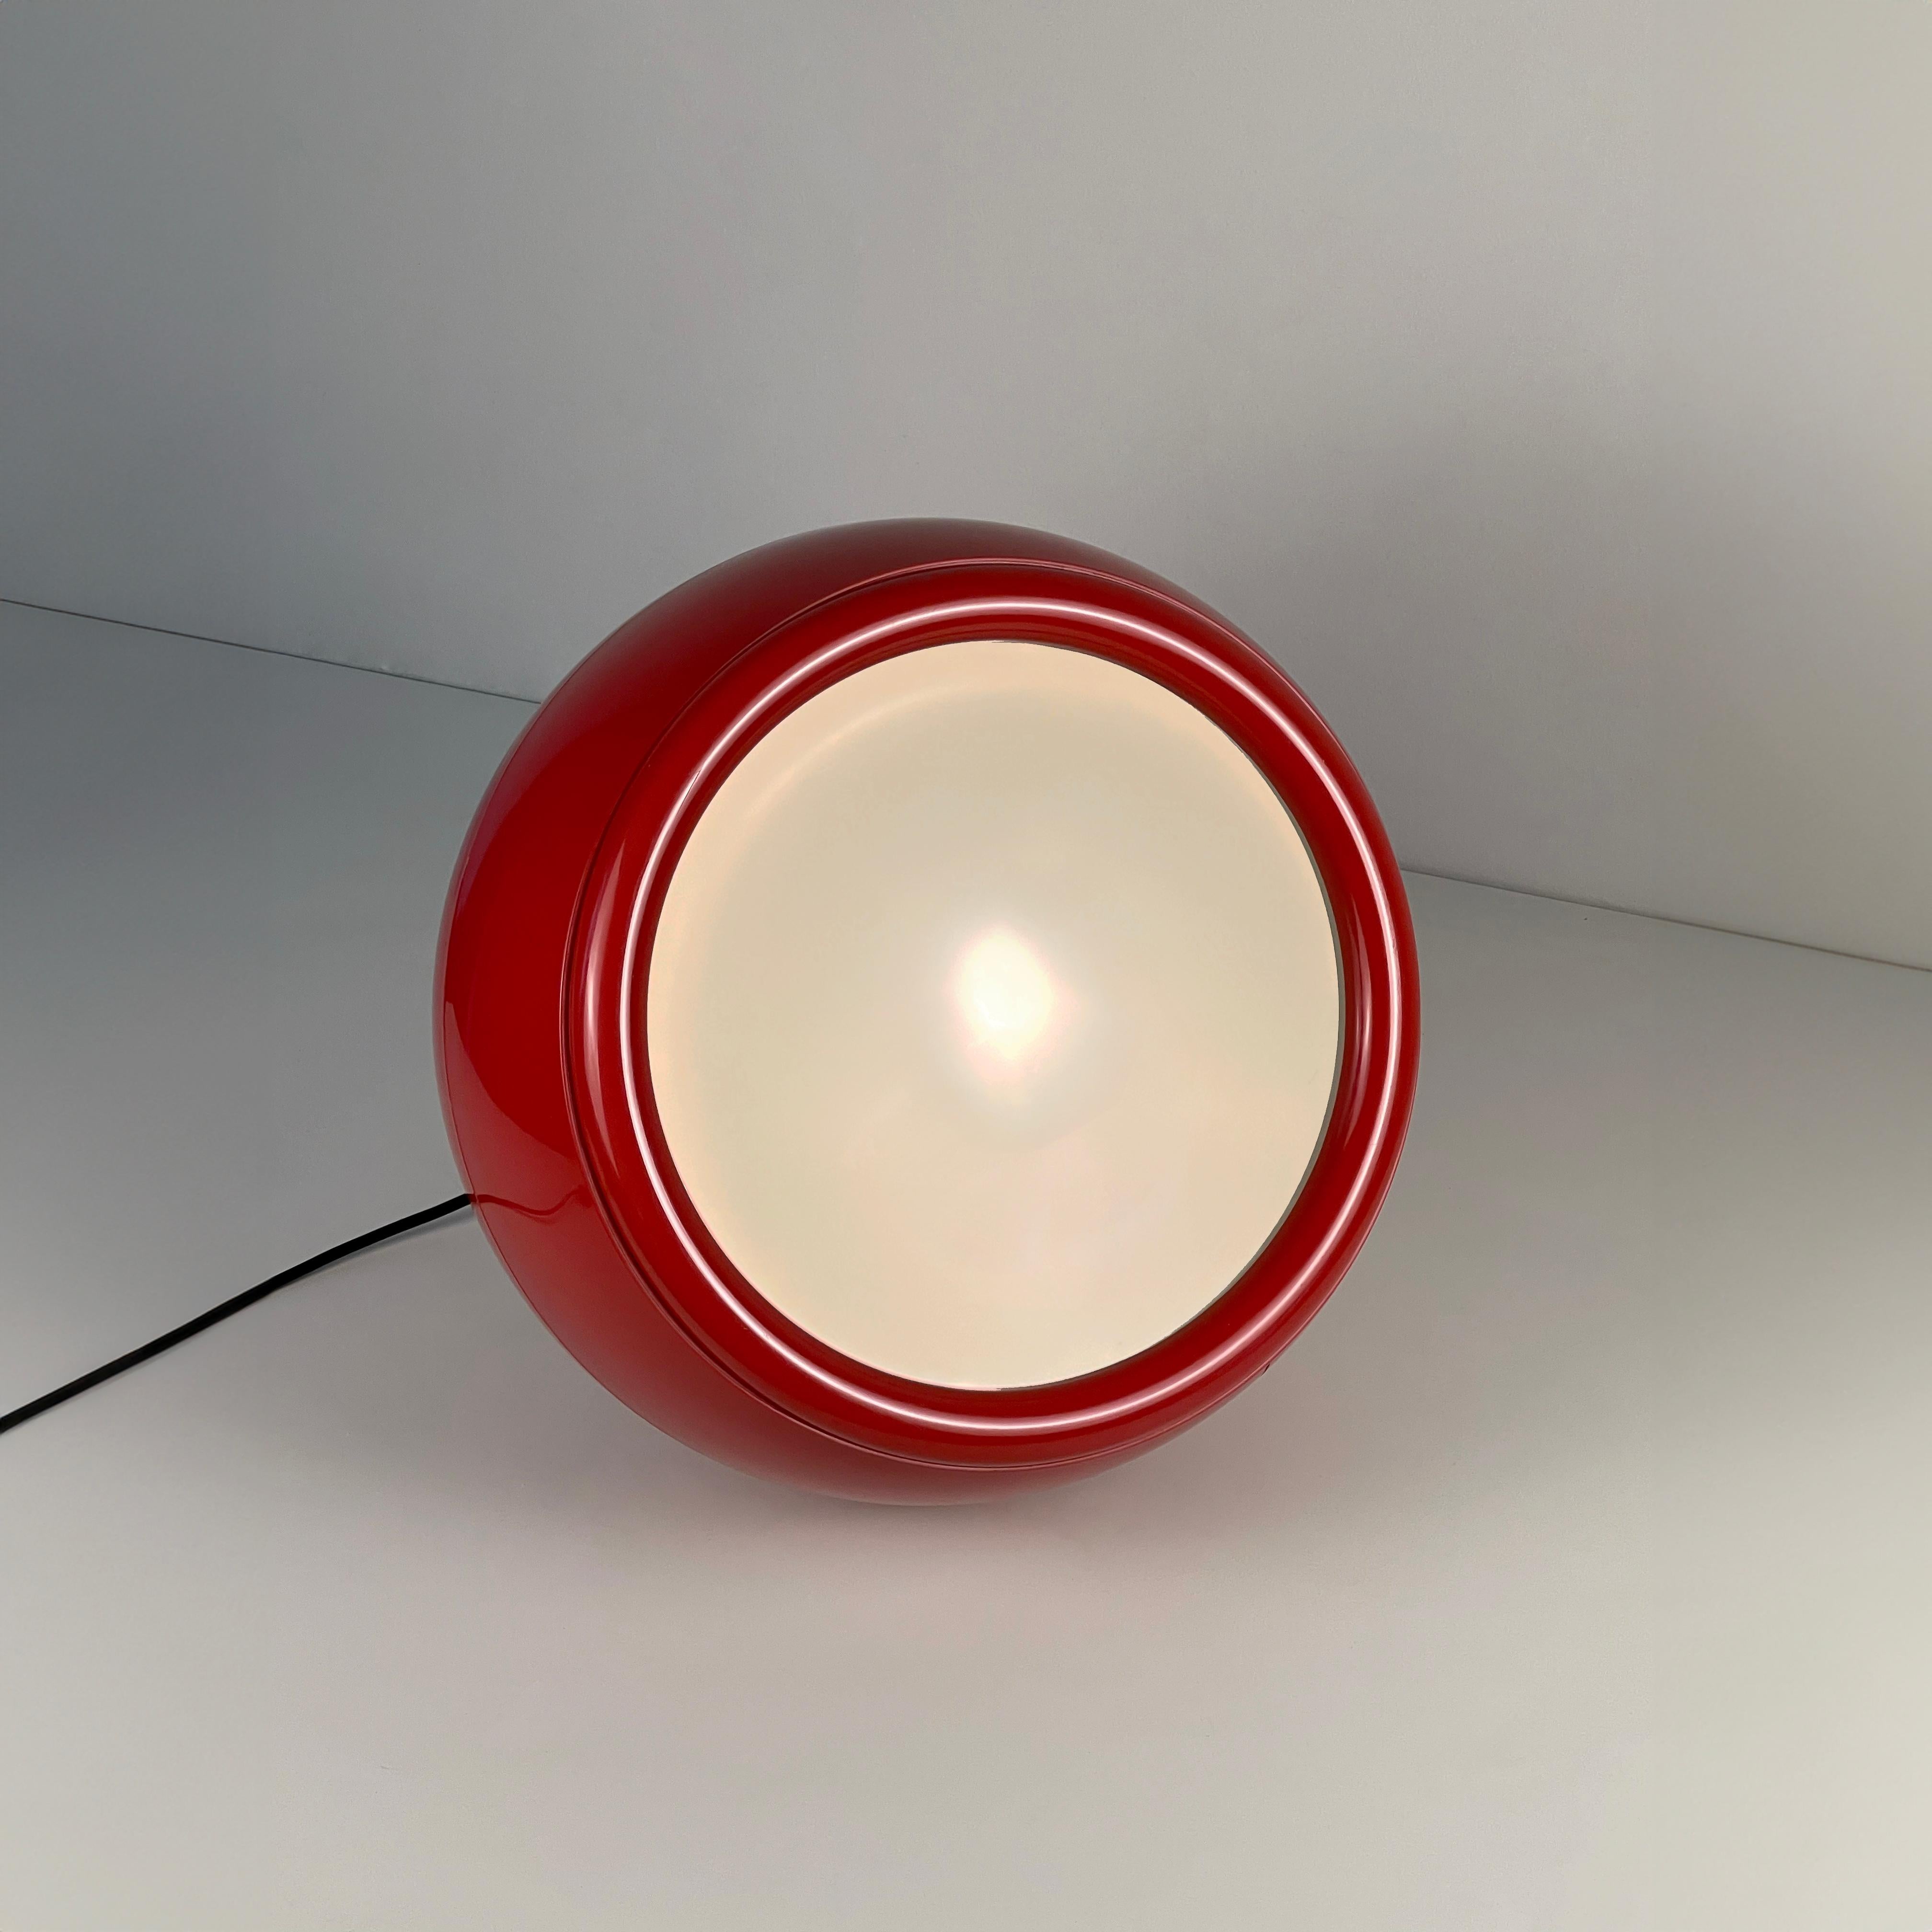 Red Pallade (1st Ed. 1968) floor lamp designed by Studio Tetrarch for Artemide For Sale 7